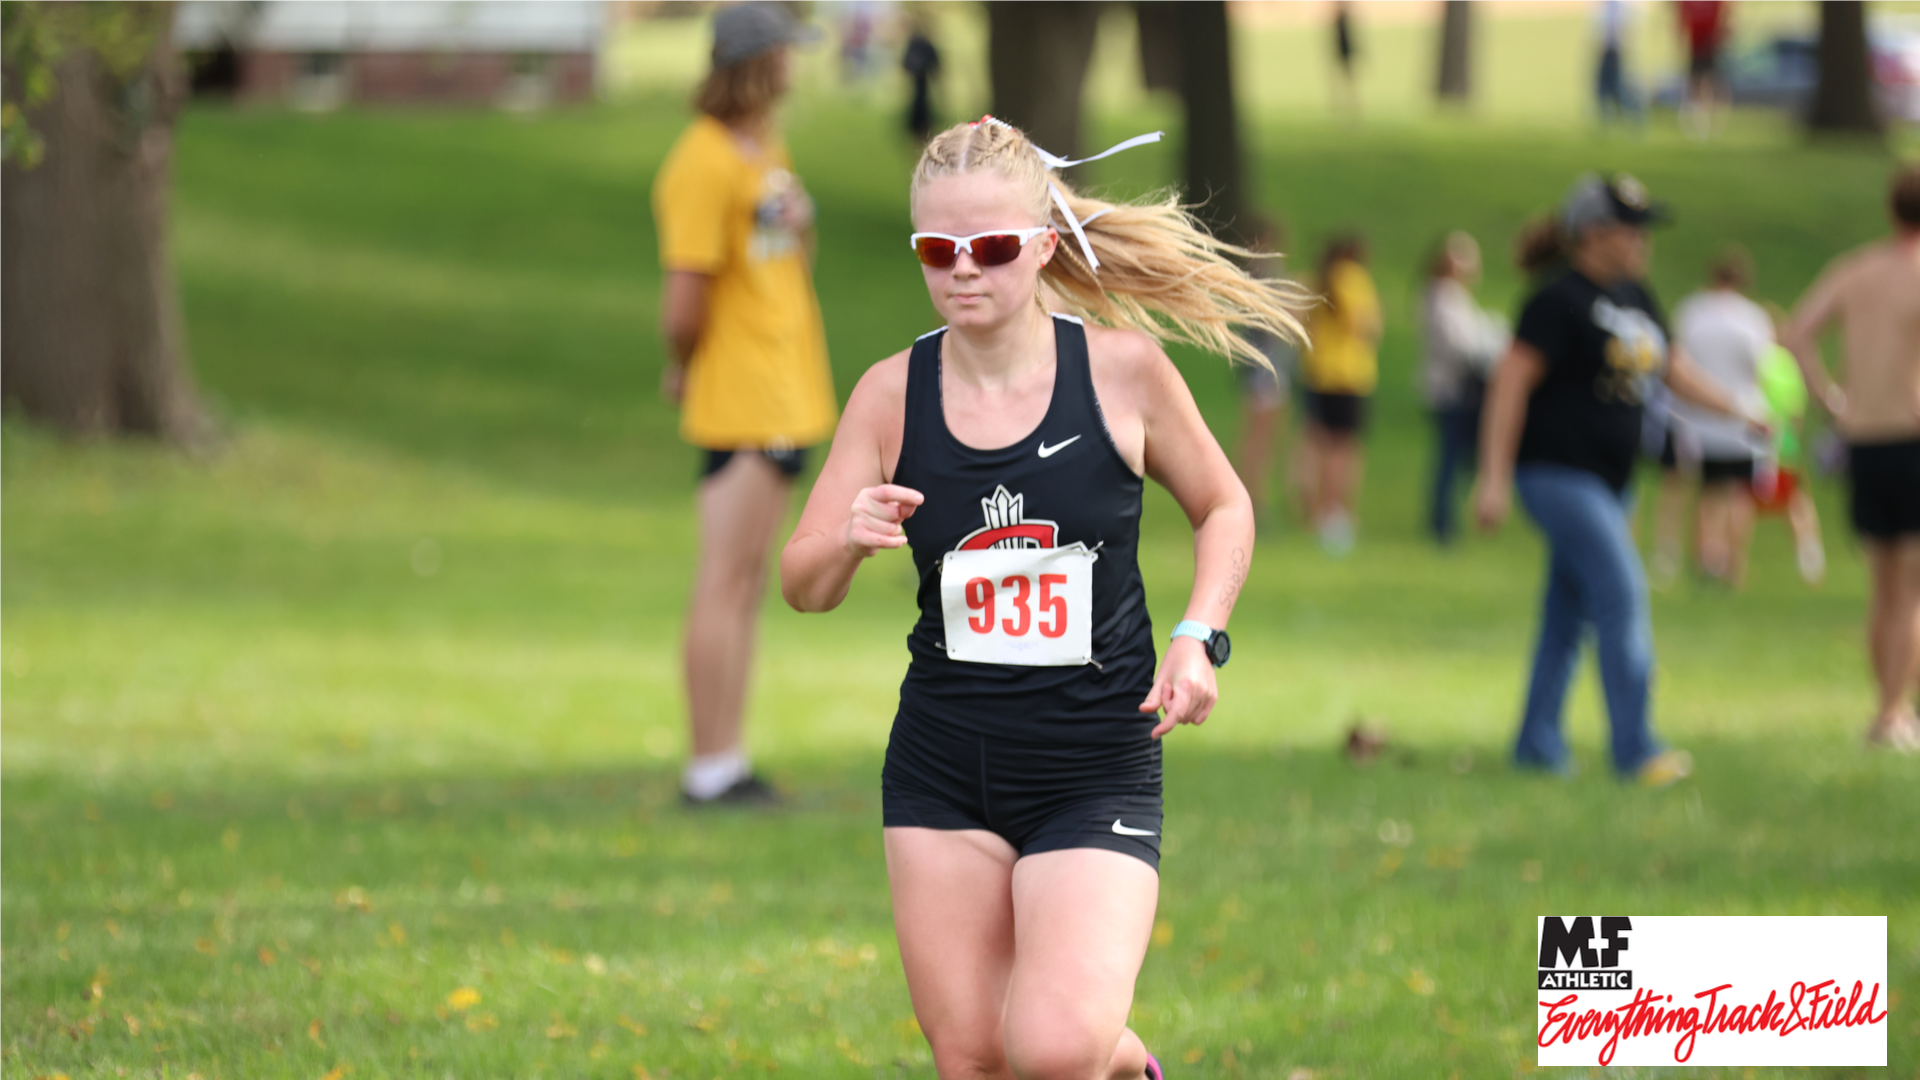 Women's Cross Country sees multiple Personal Records at Lansing Invite